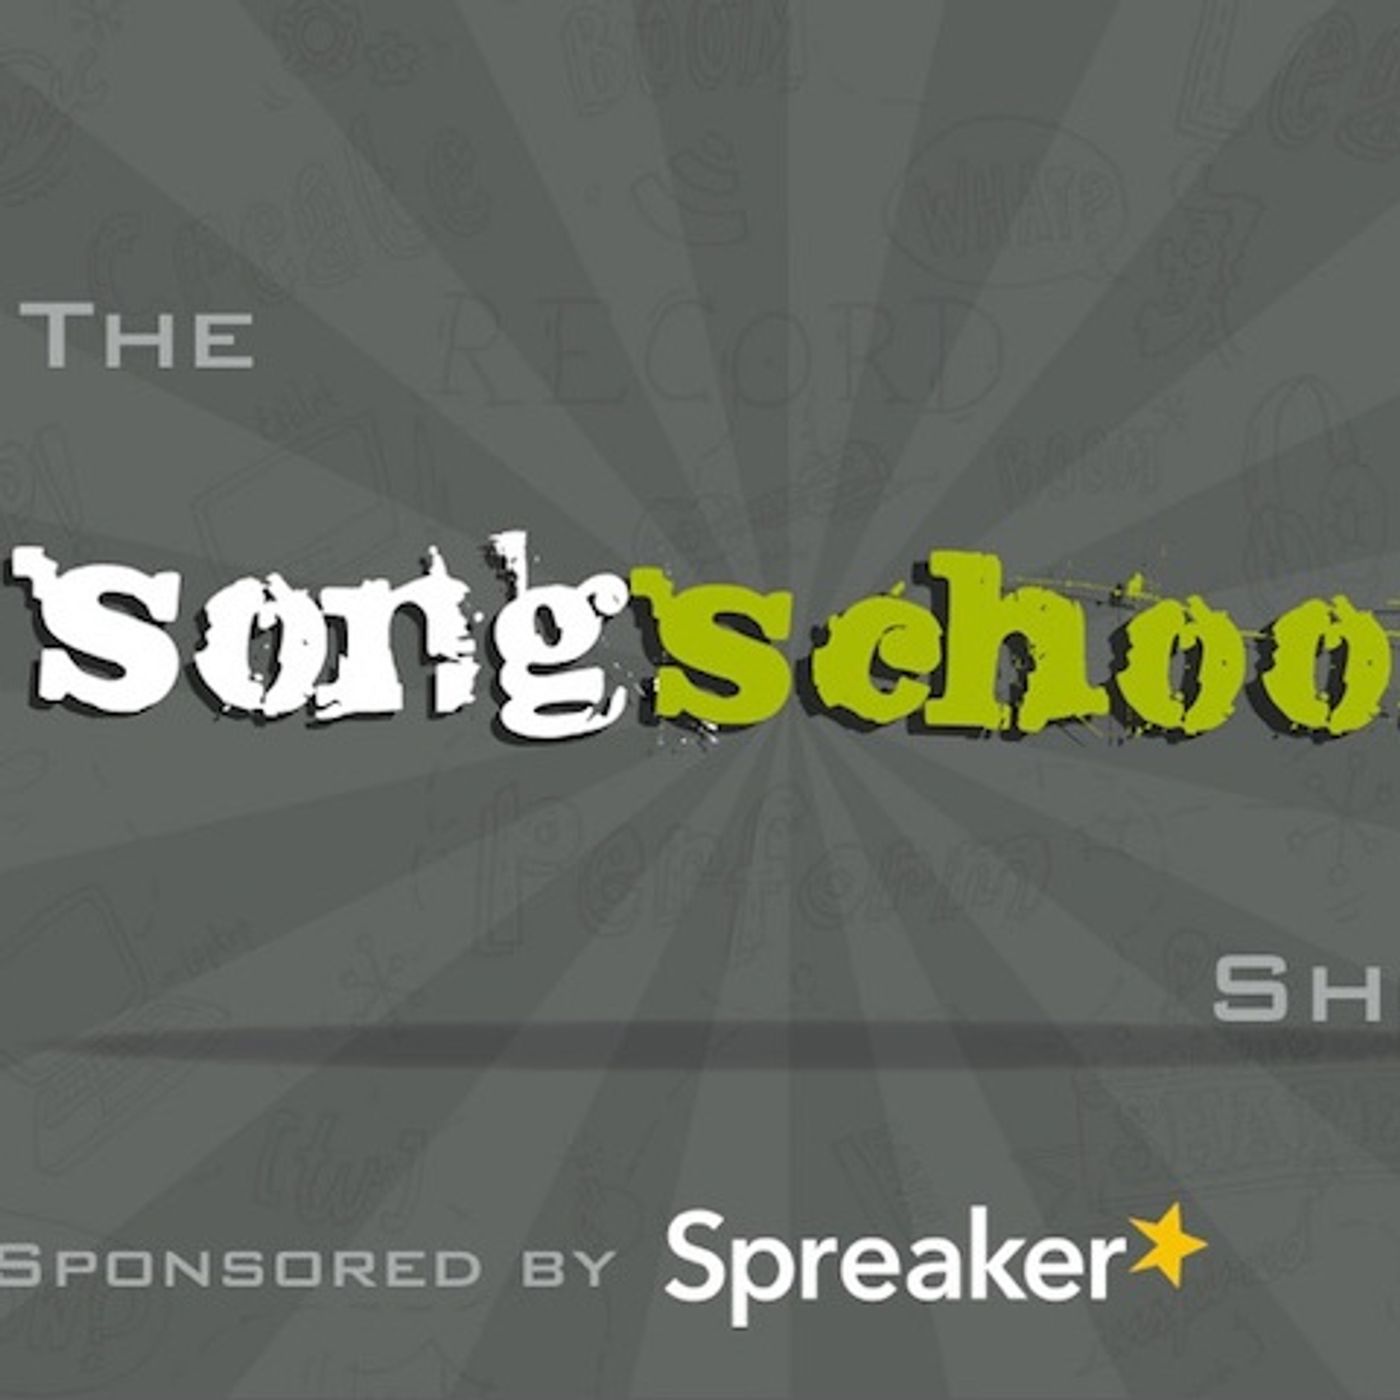 The Songschool Show @ Mercy Secondary School Waterford TY 2